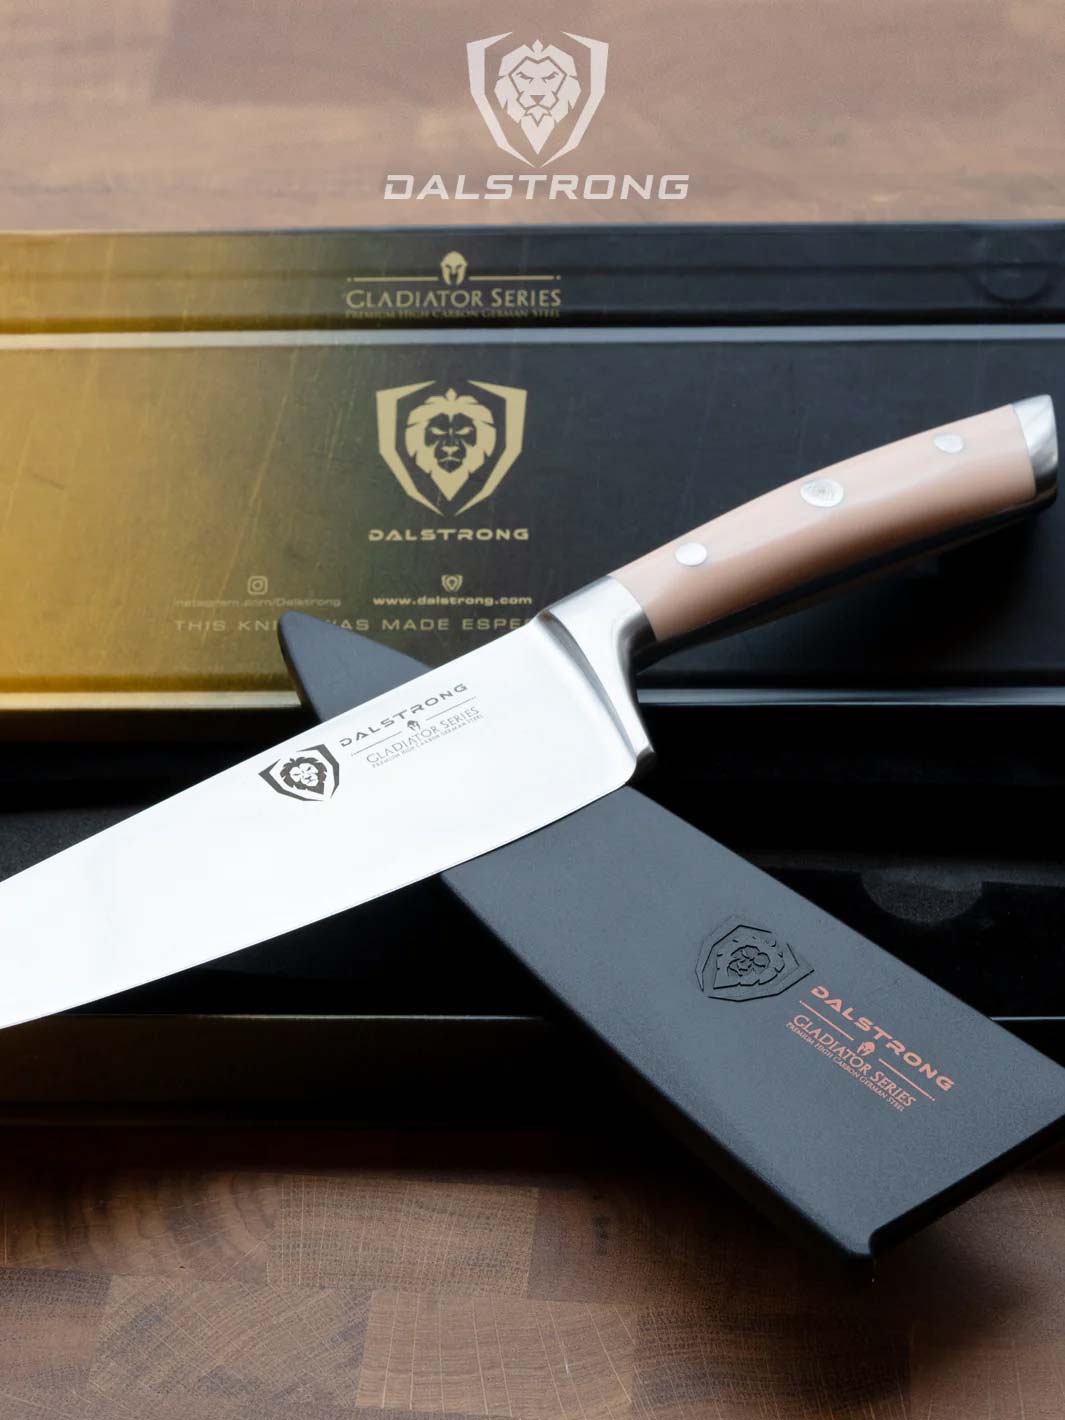 Dalstrong gladiator series 8 inch chef knife with peach handle and black sheath outside of it's premium packaging.